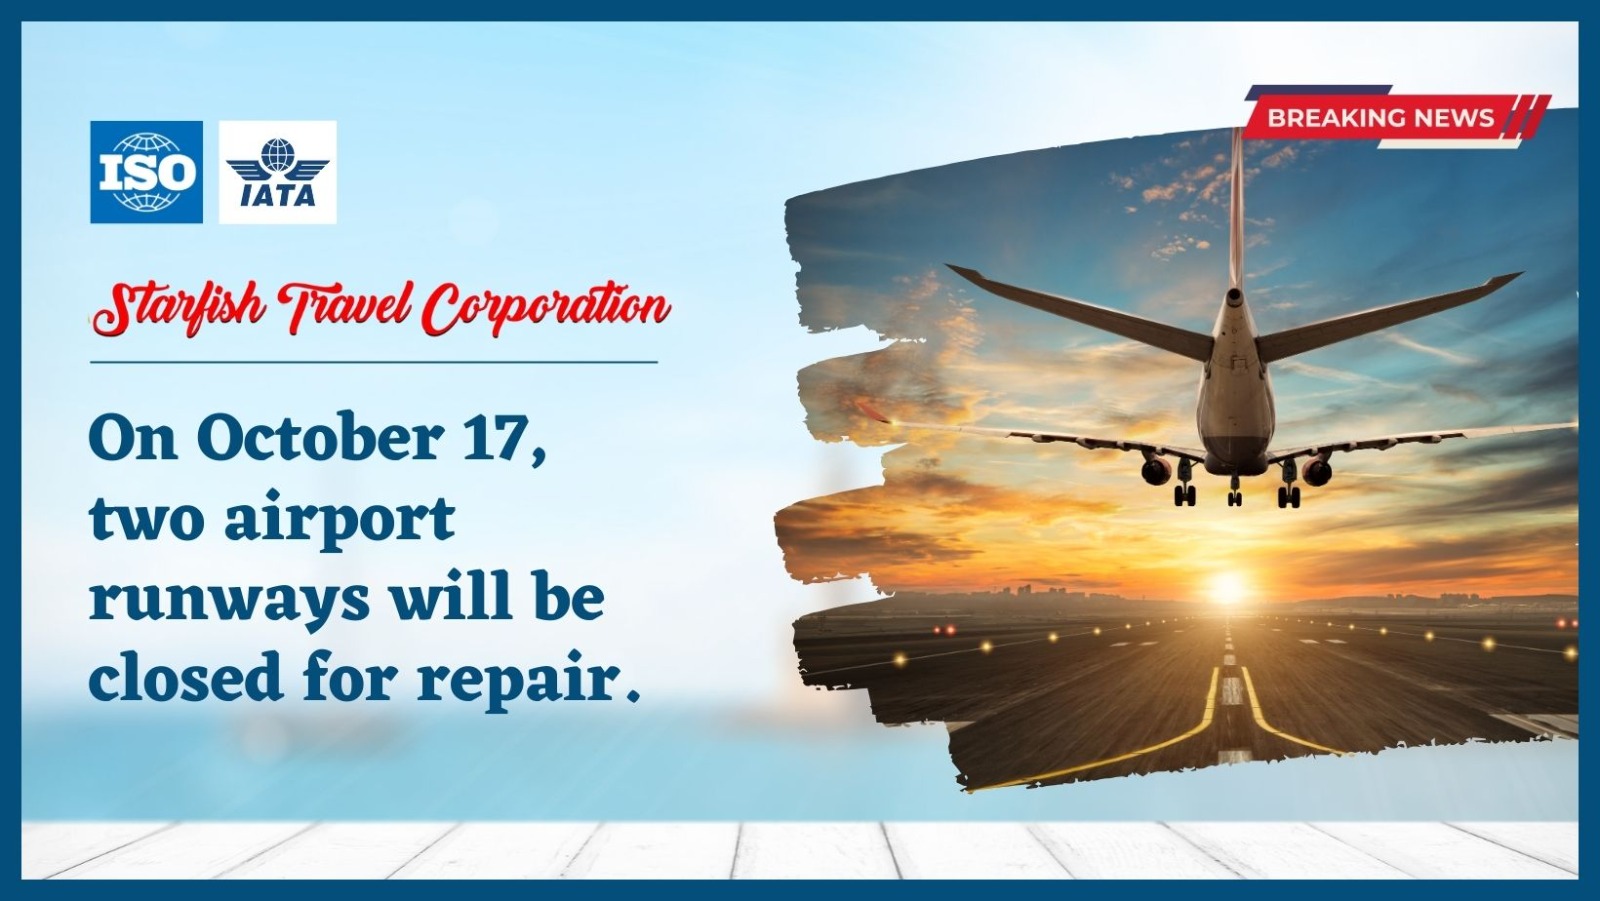 On October 17, two airport runways will be closed for repair.